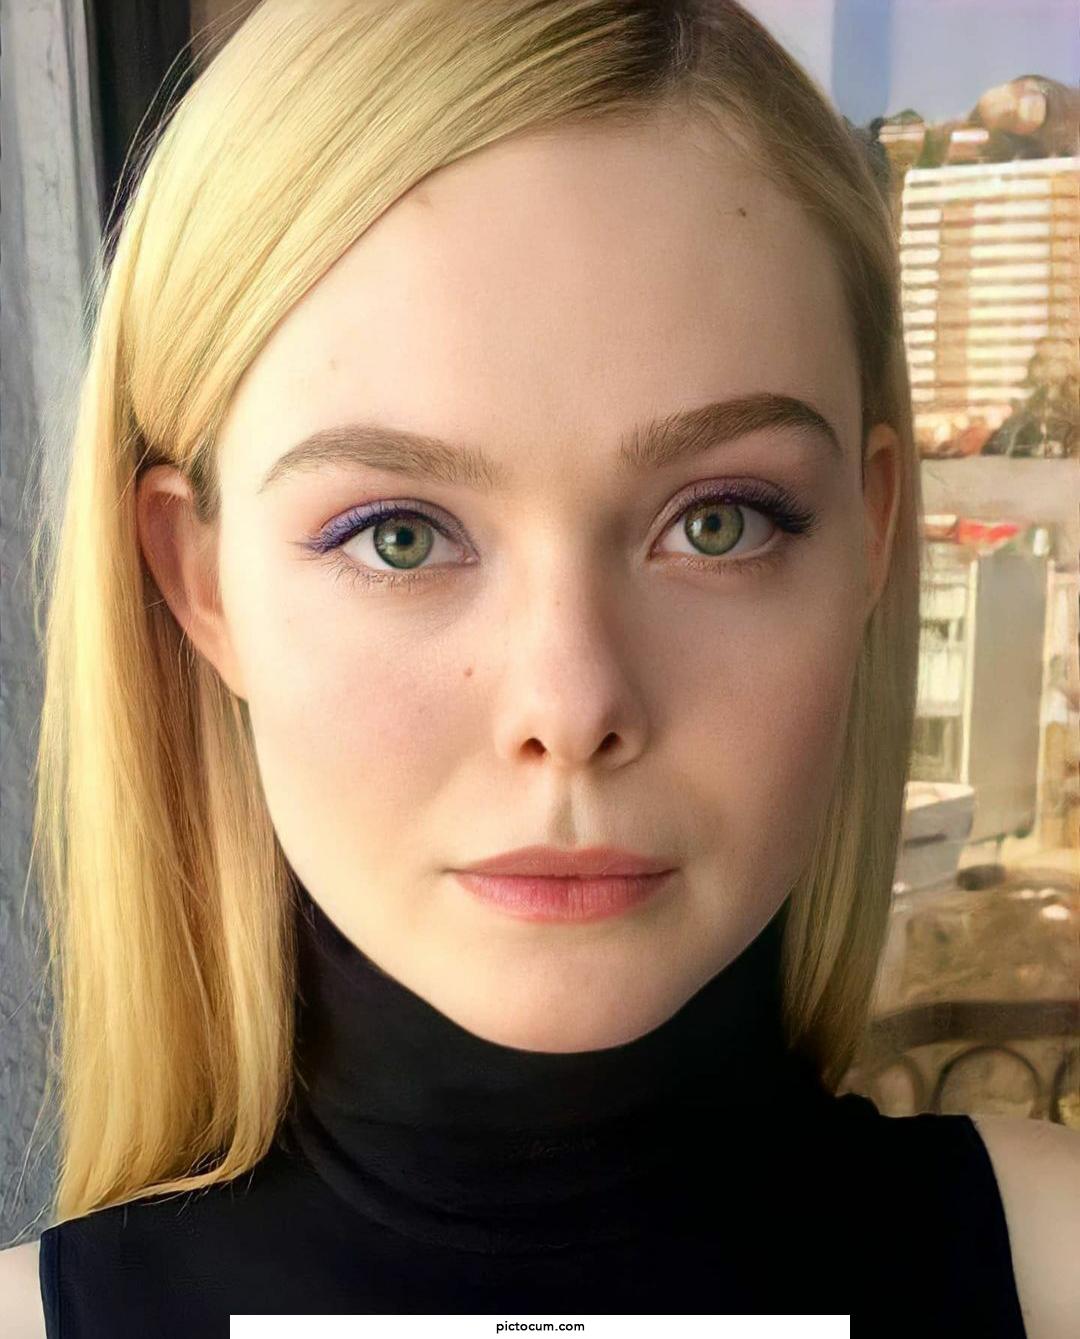 Elle Fanning — how many ways would you wreck this face?